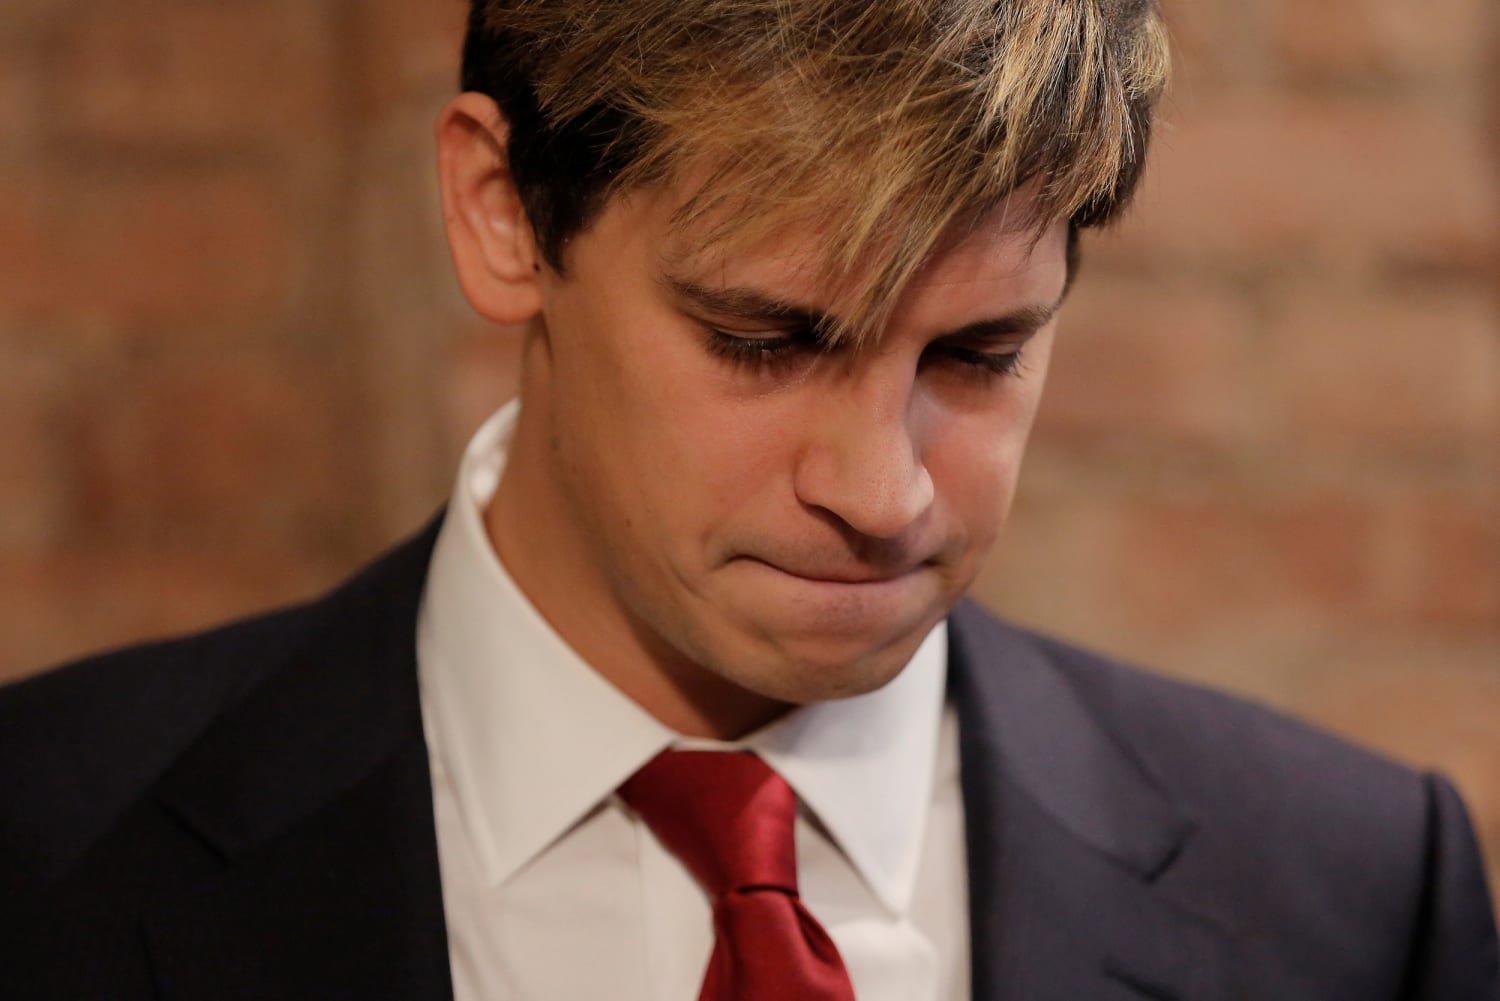 Yiannopoulos Breitbart, Apologizes for Uproar Over Year-Old Comments